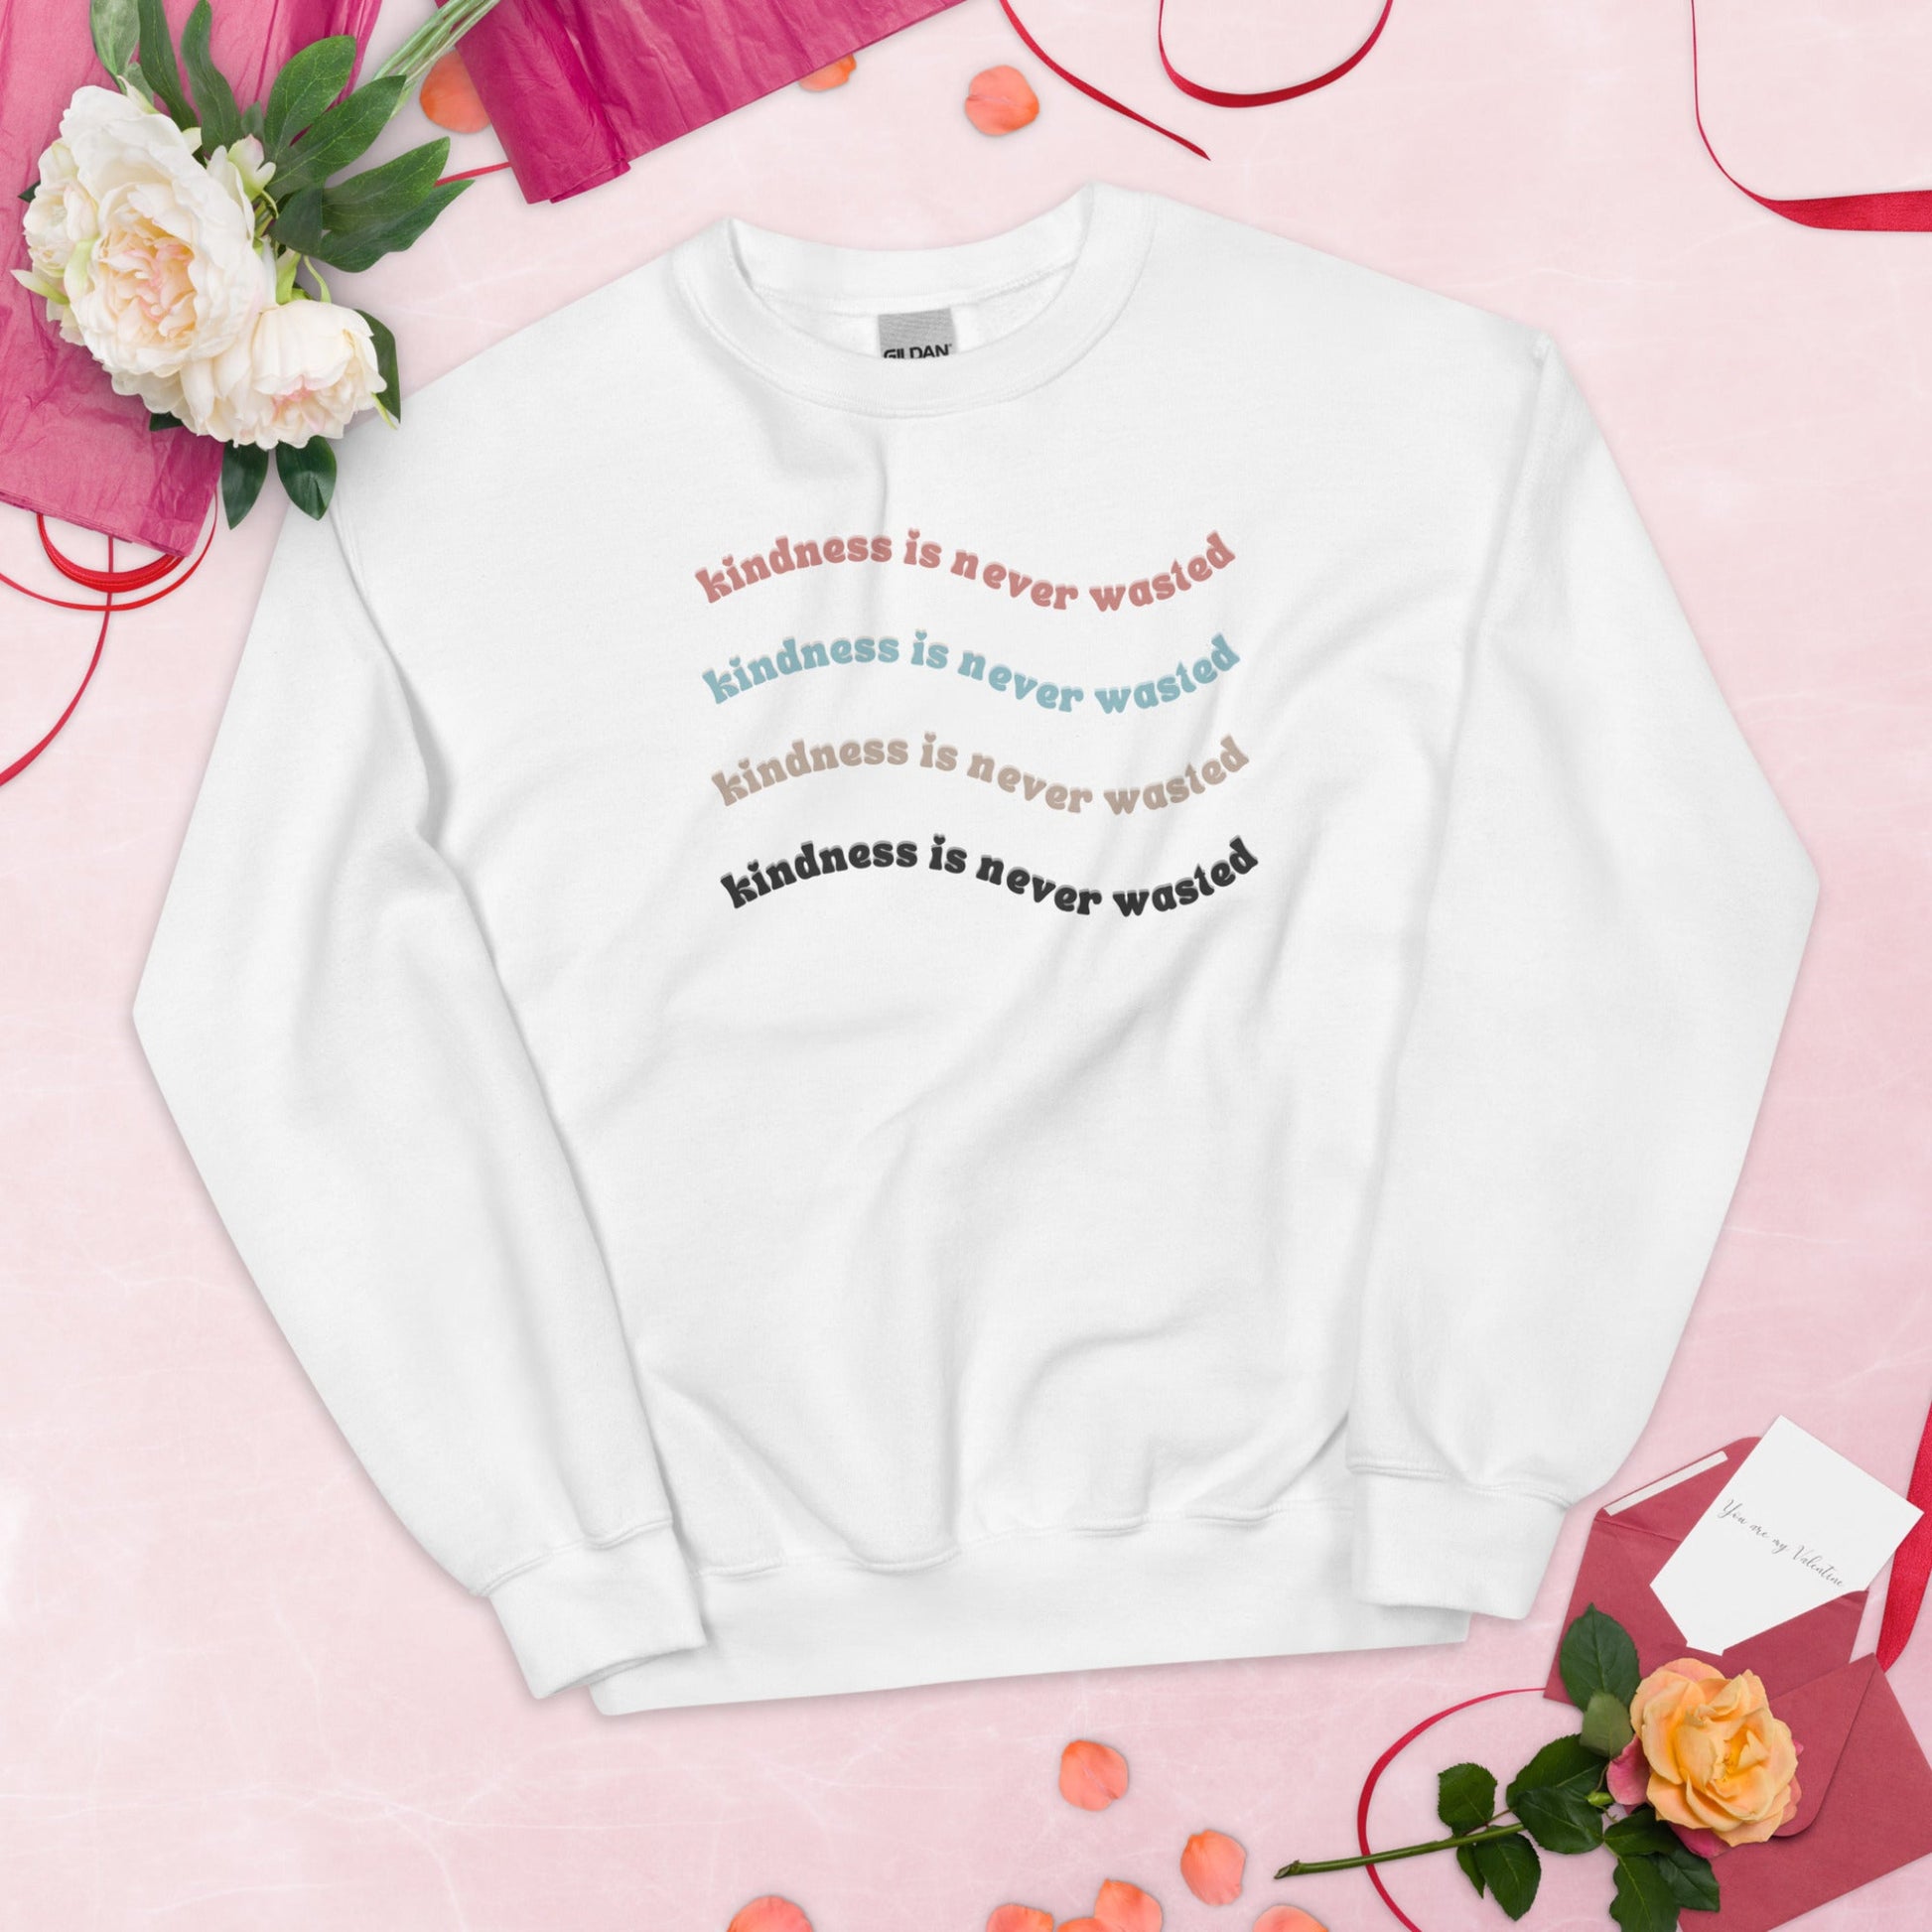 White "kindness is never wasted" crew neck with print in pink, tan, light blue, and black.